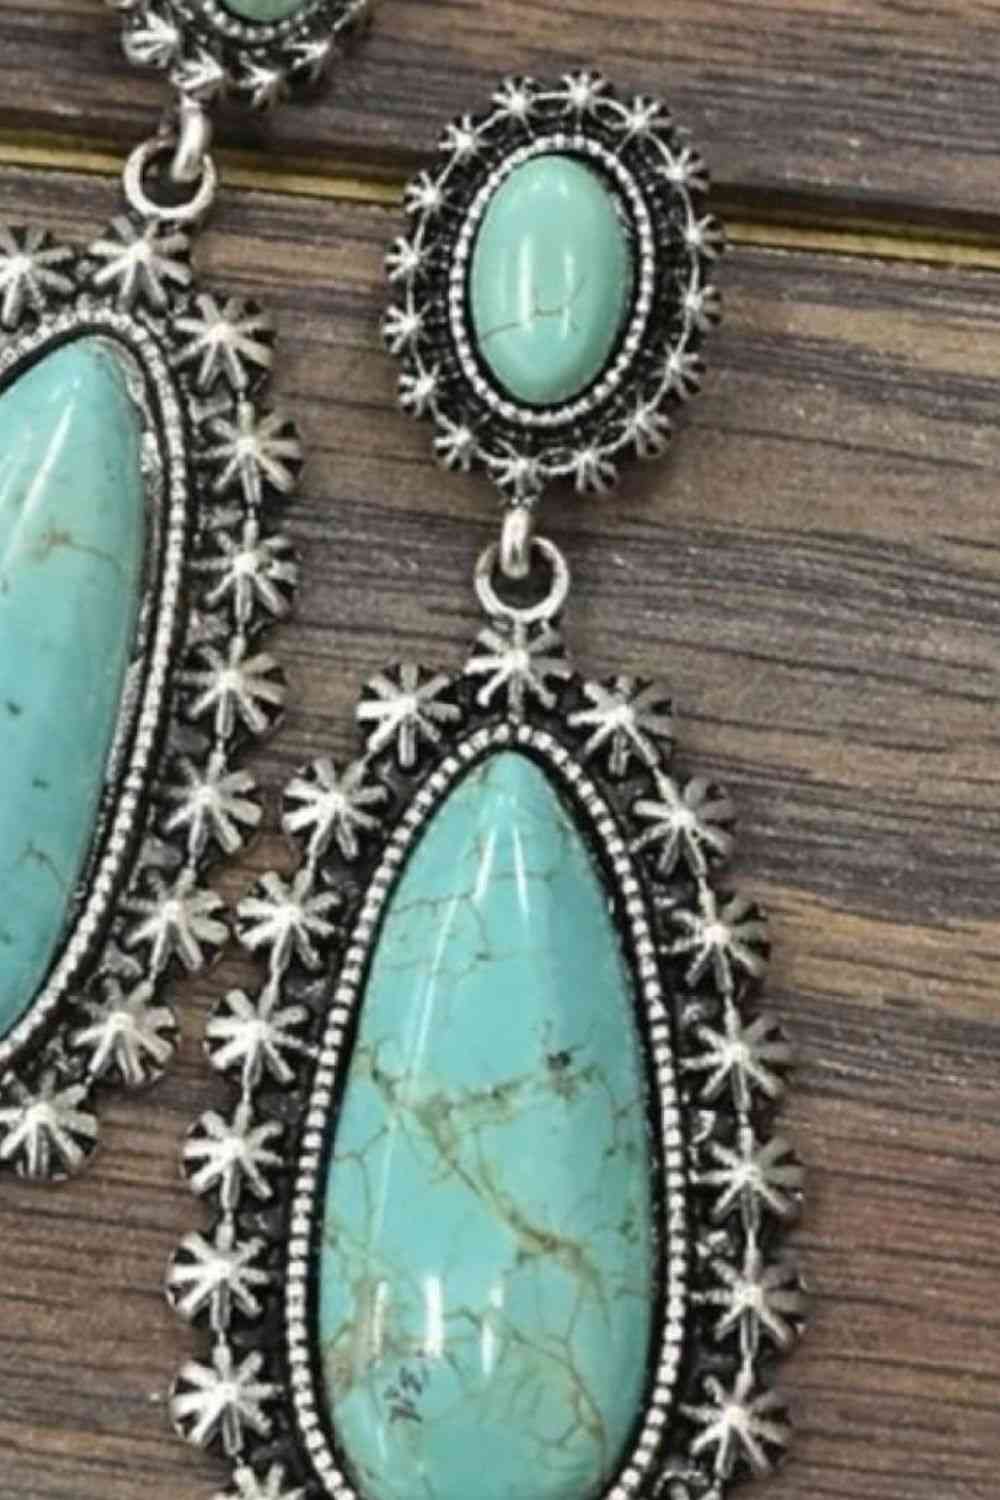 Artificial Turquoise Earrings